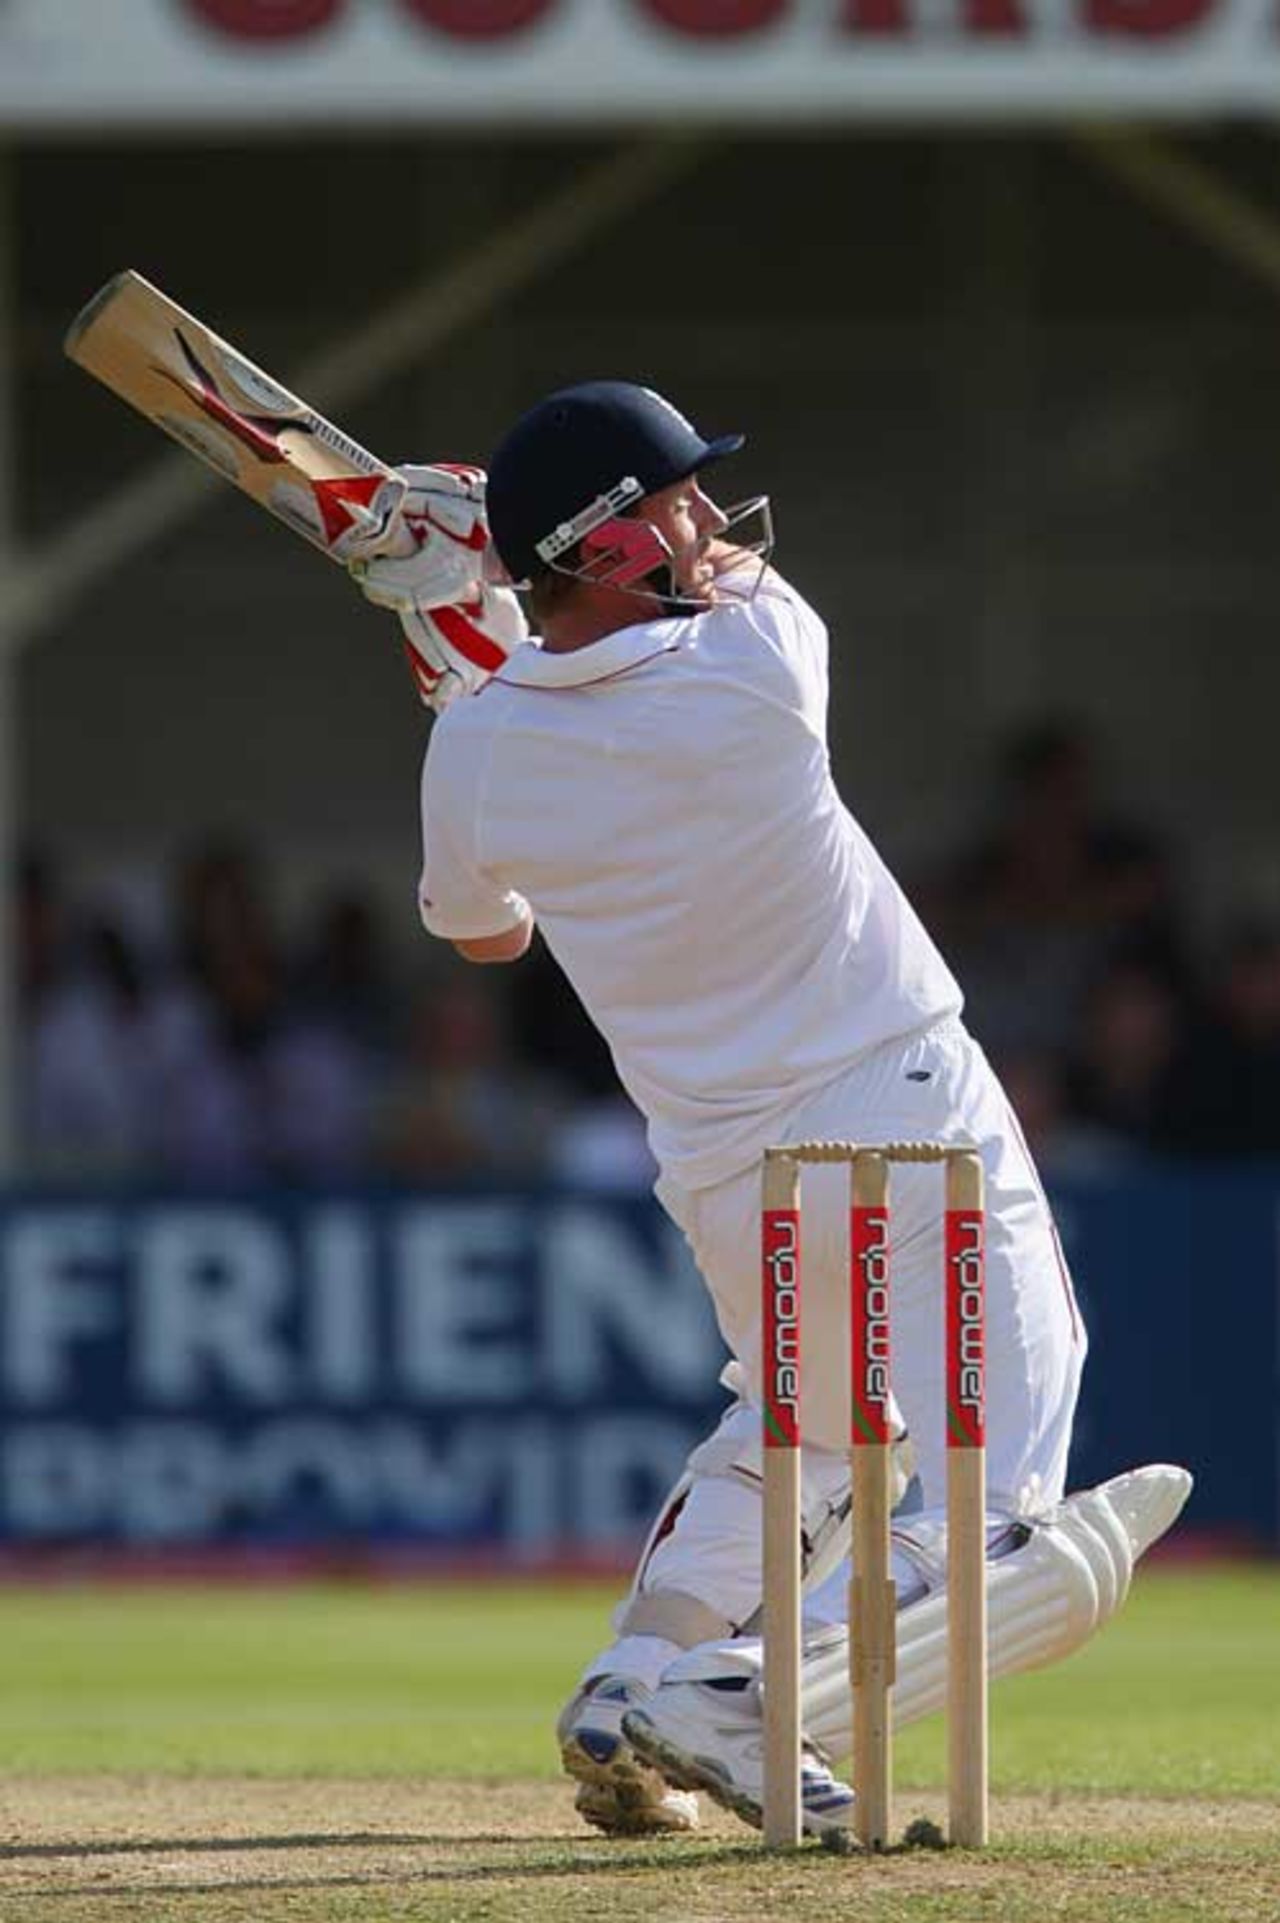 Paul Collingwood upper cuts over backward point, England v South Africa, 3rd Test, August 1, 2008